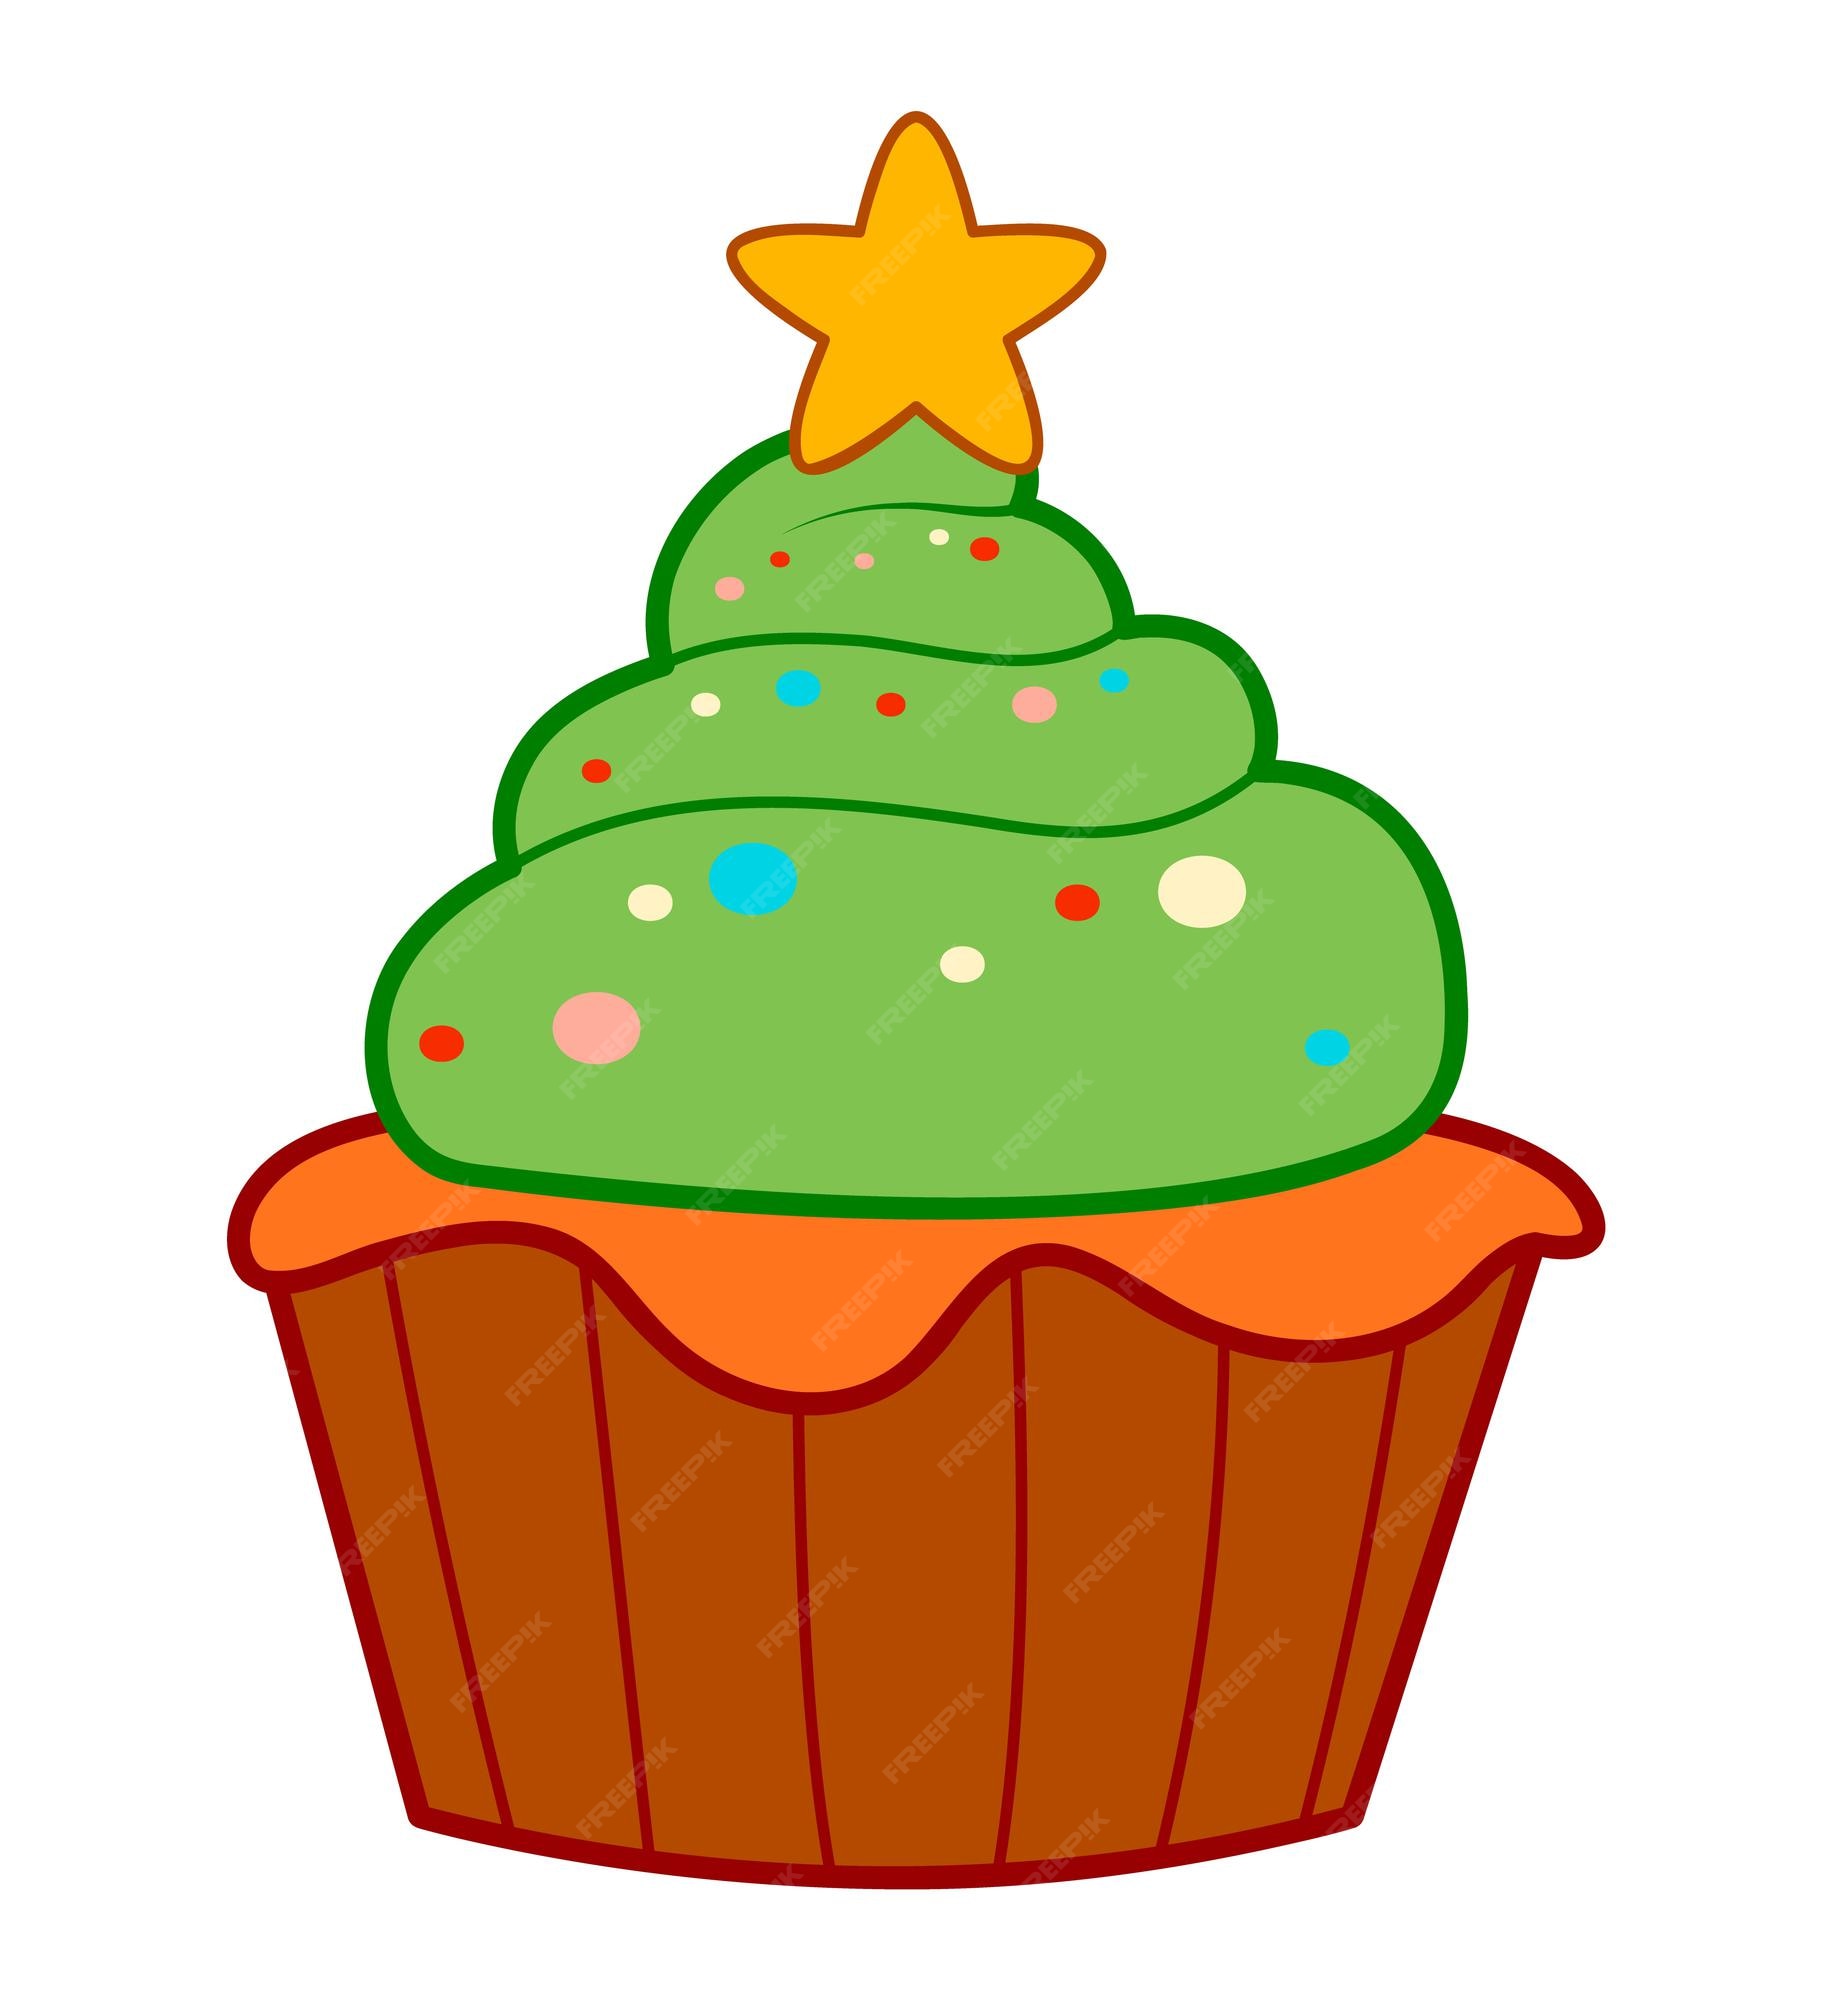 animated cake clipart